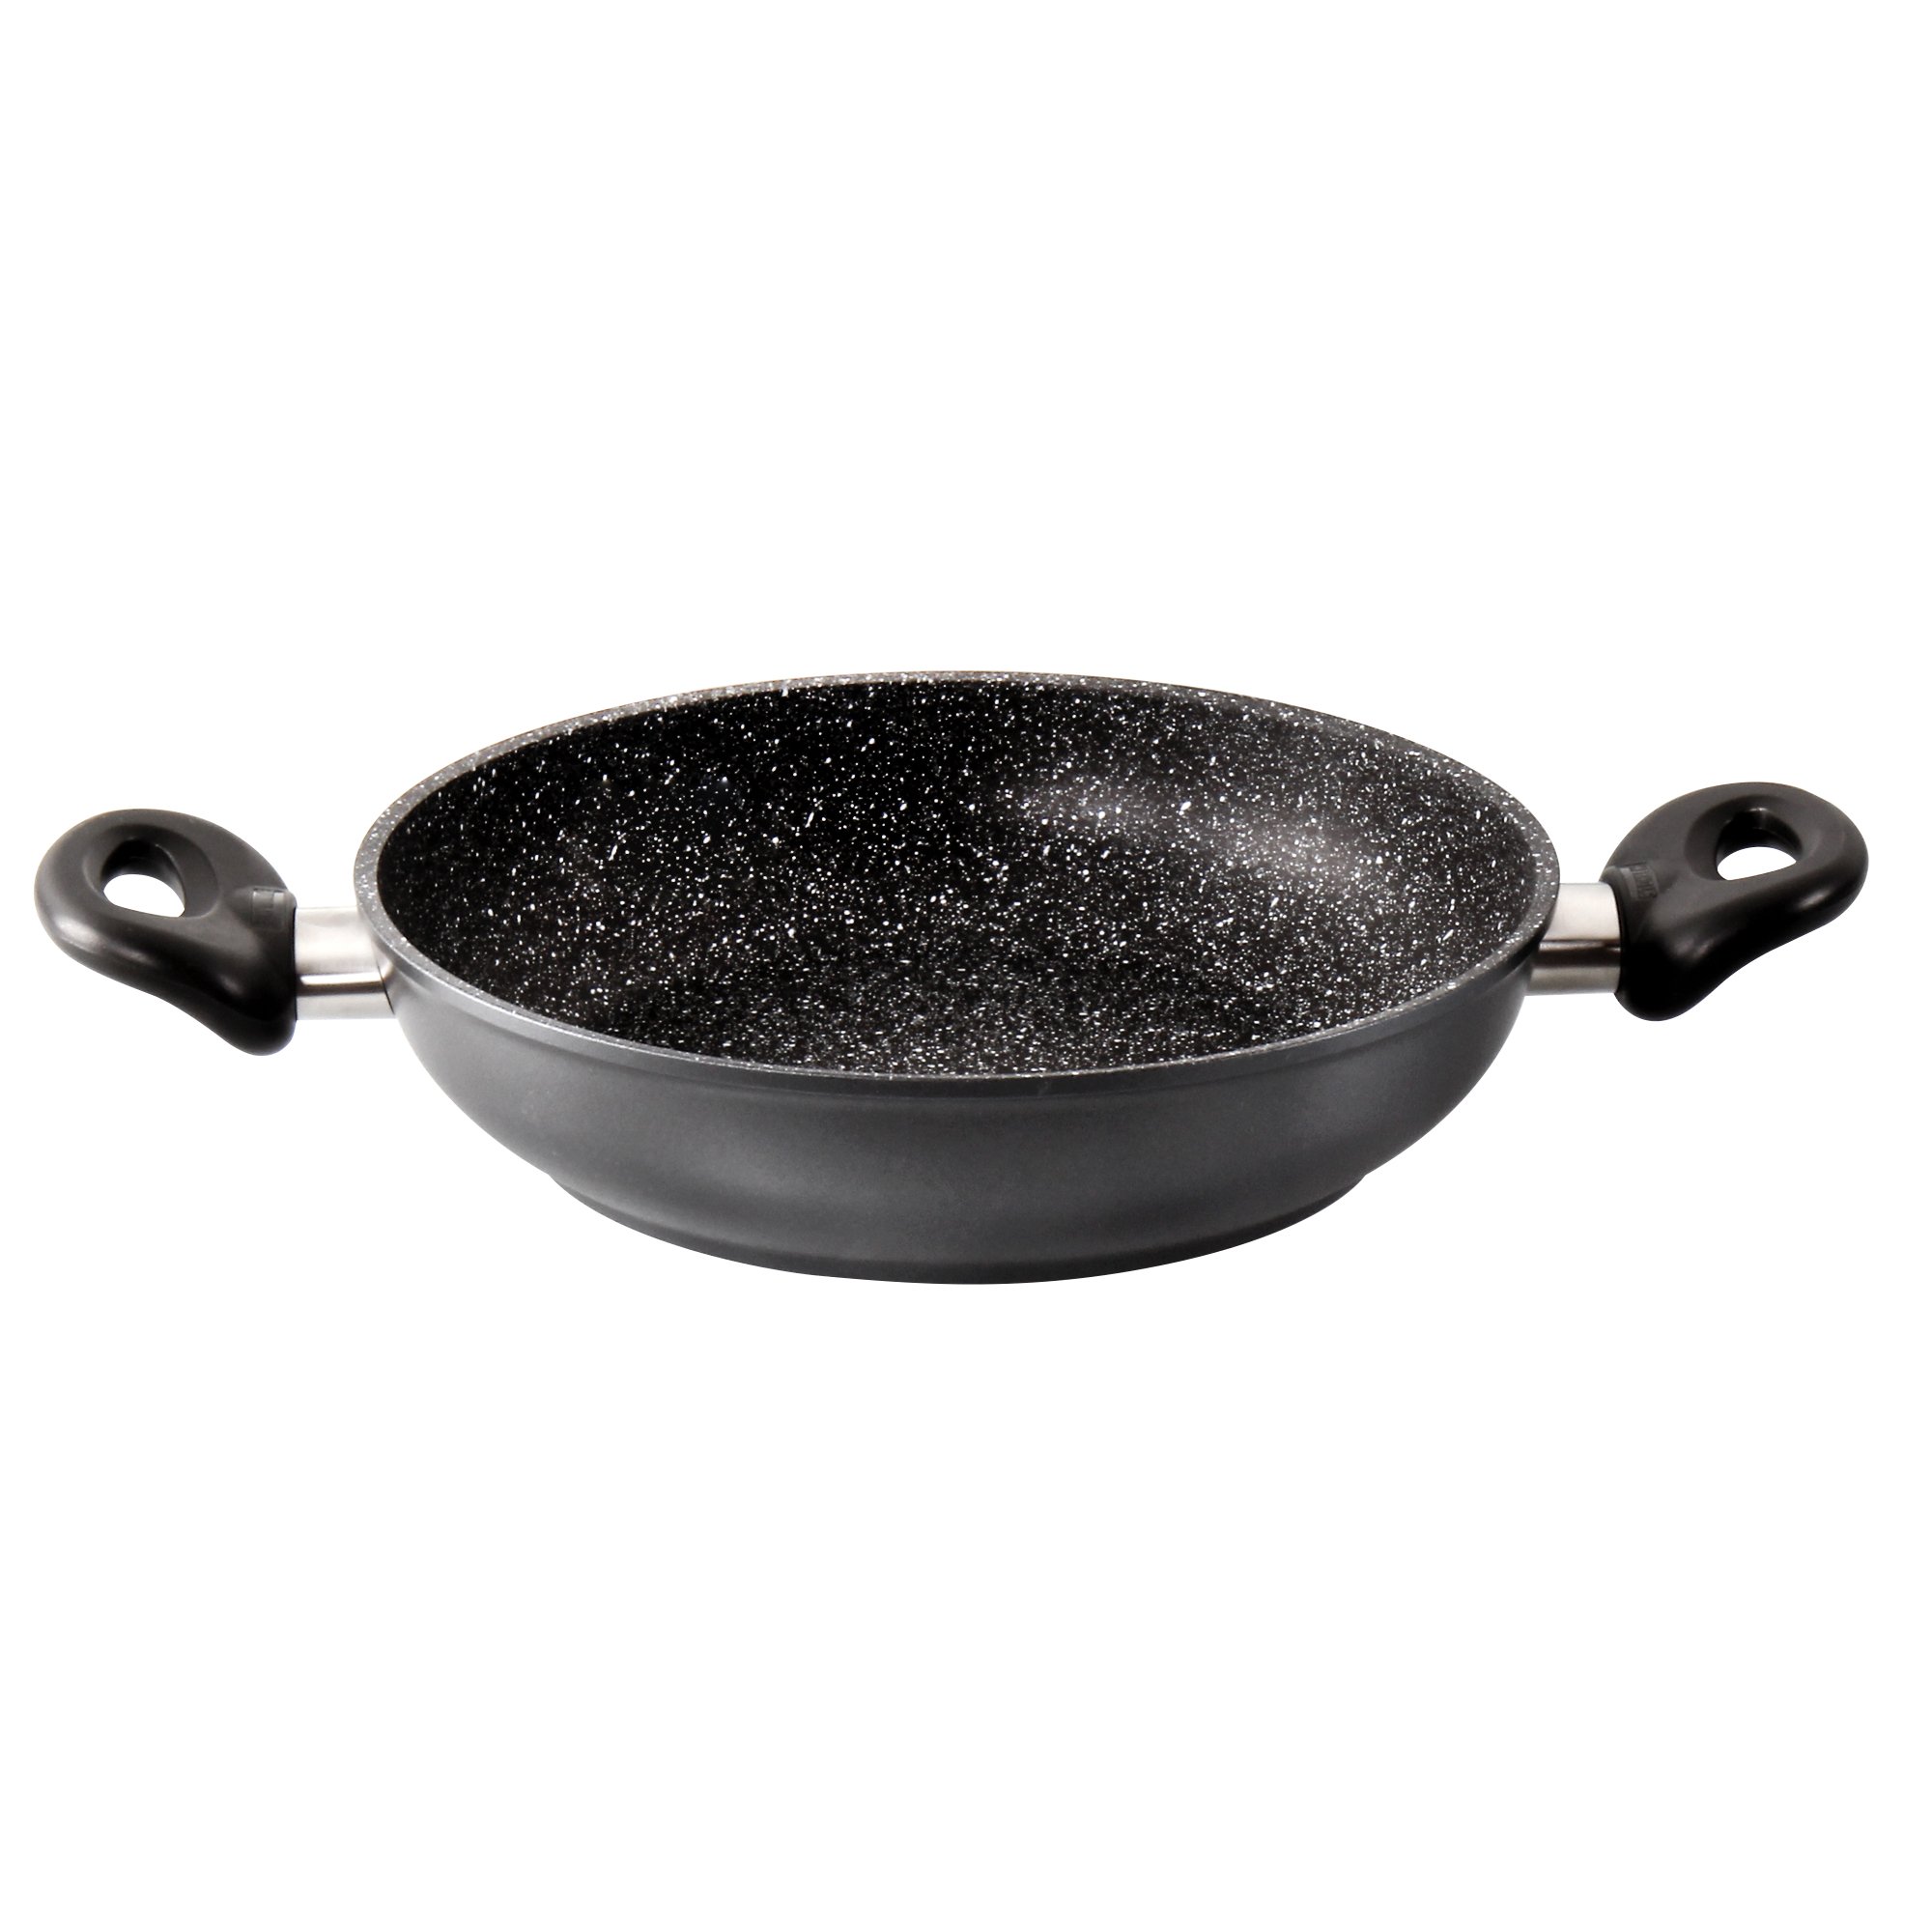 STONELINE® Serving Pan 28 cm, Non-Stick Pan | MADE IN GERMANY | CLASSIC